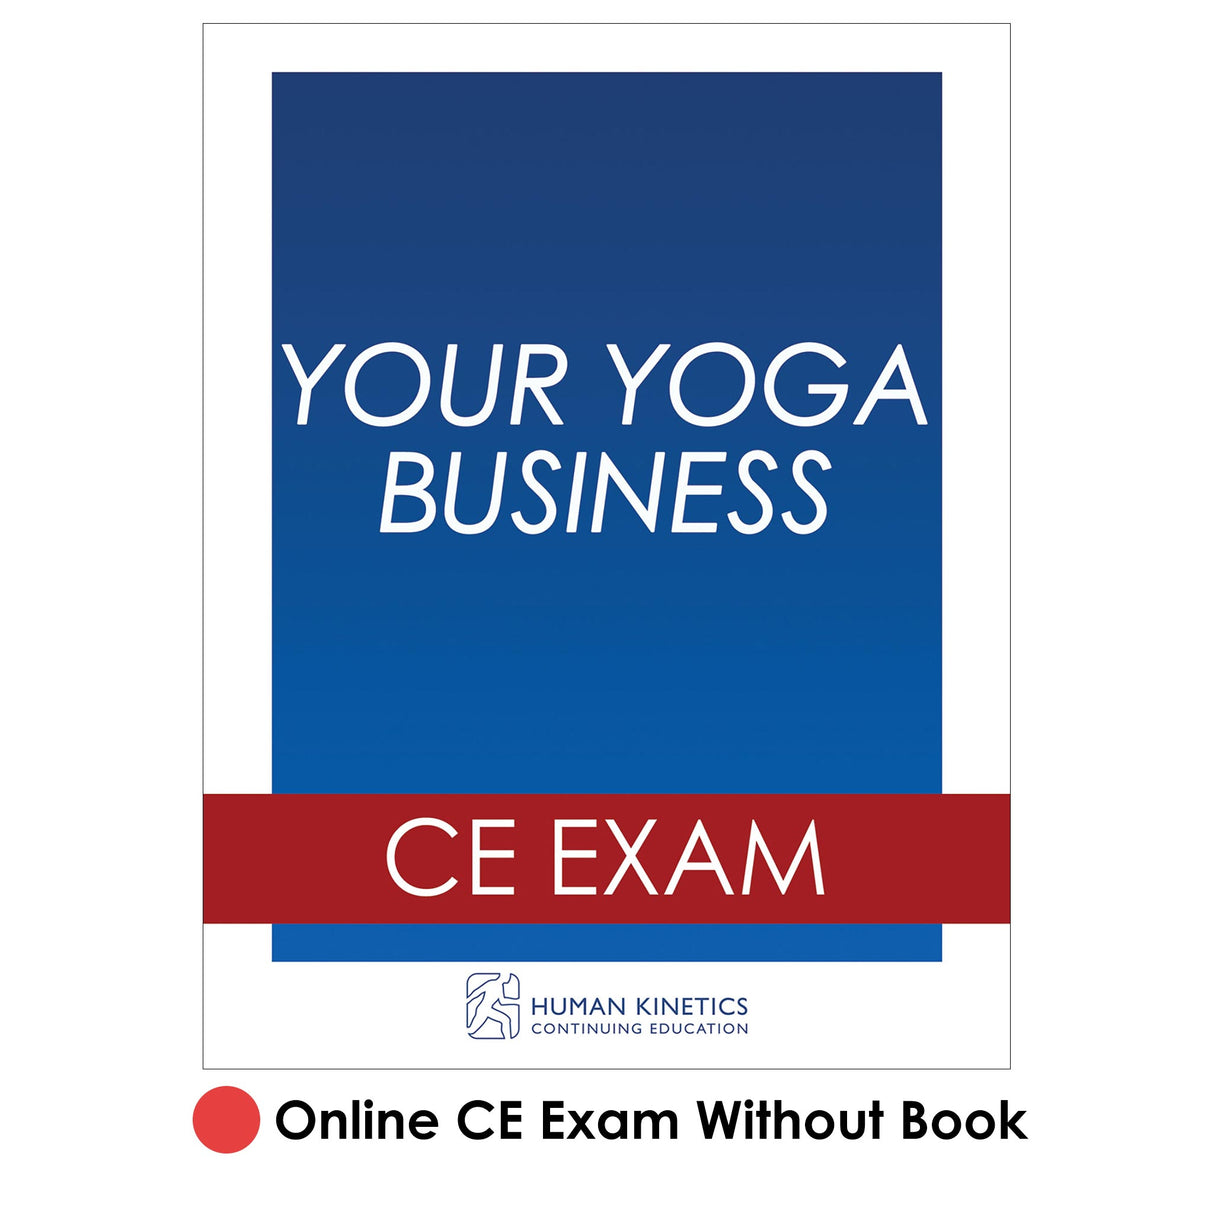 Your Yoga Business Online CE Exam Without Book